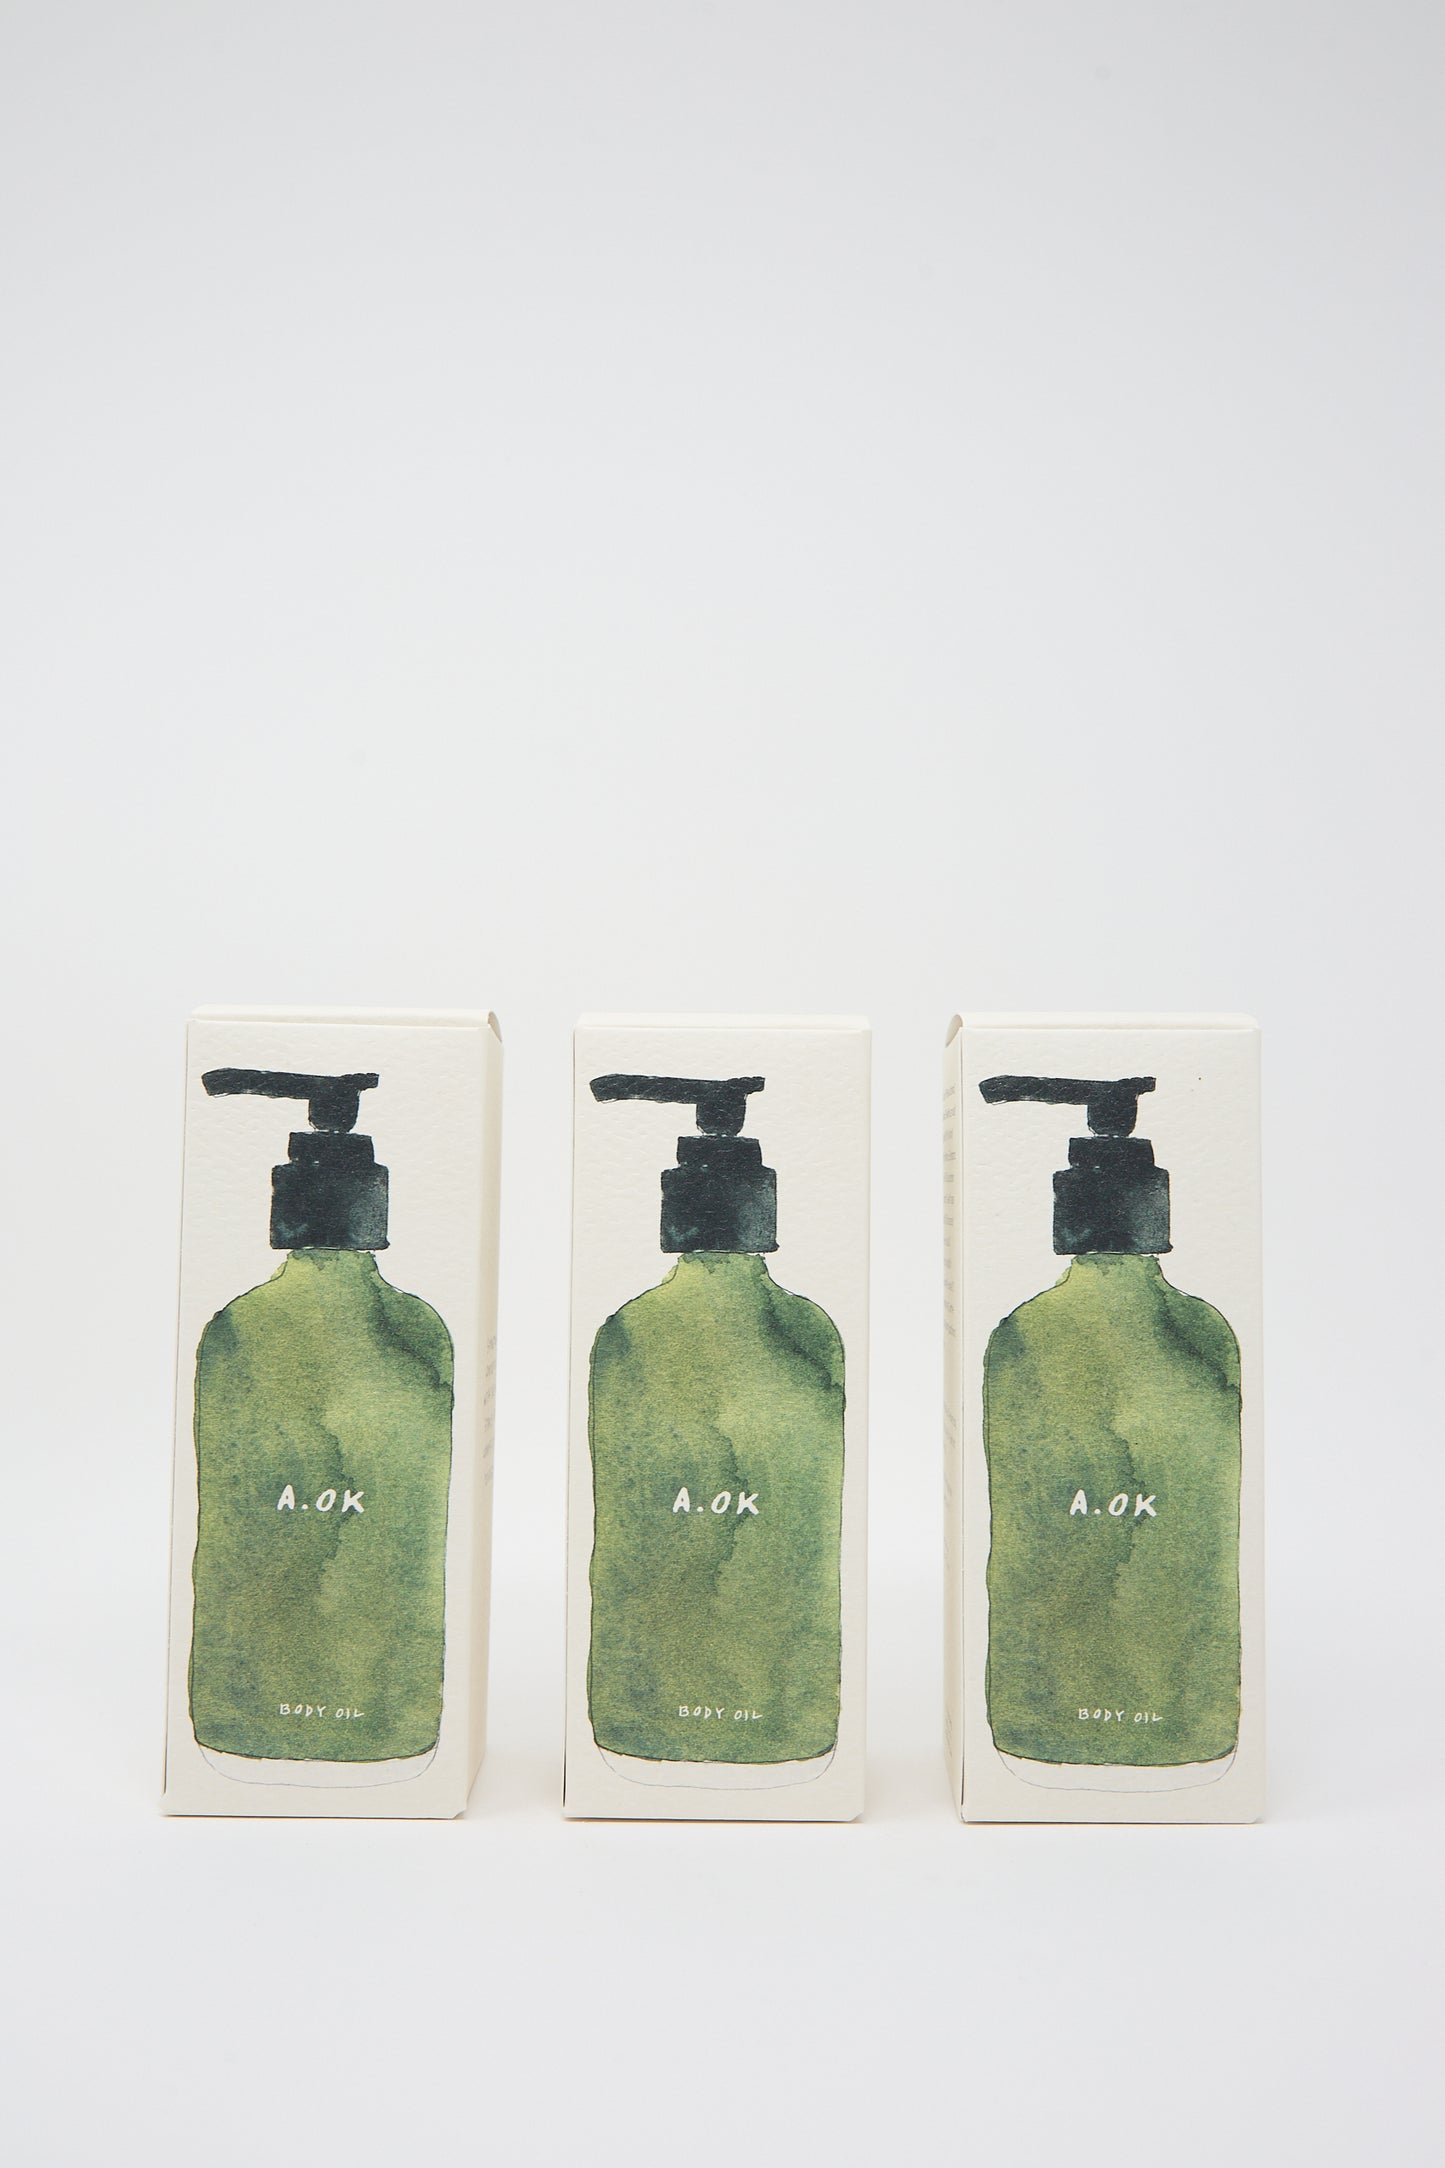 Three green pump bottles labeled "A.OK" are shown in a row against a plain white background, each containing Botanical Body Oil with a refreshing unisex aroma.